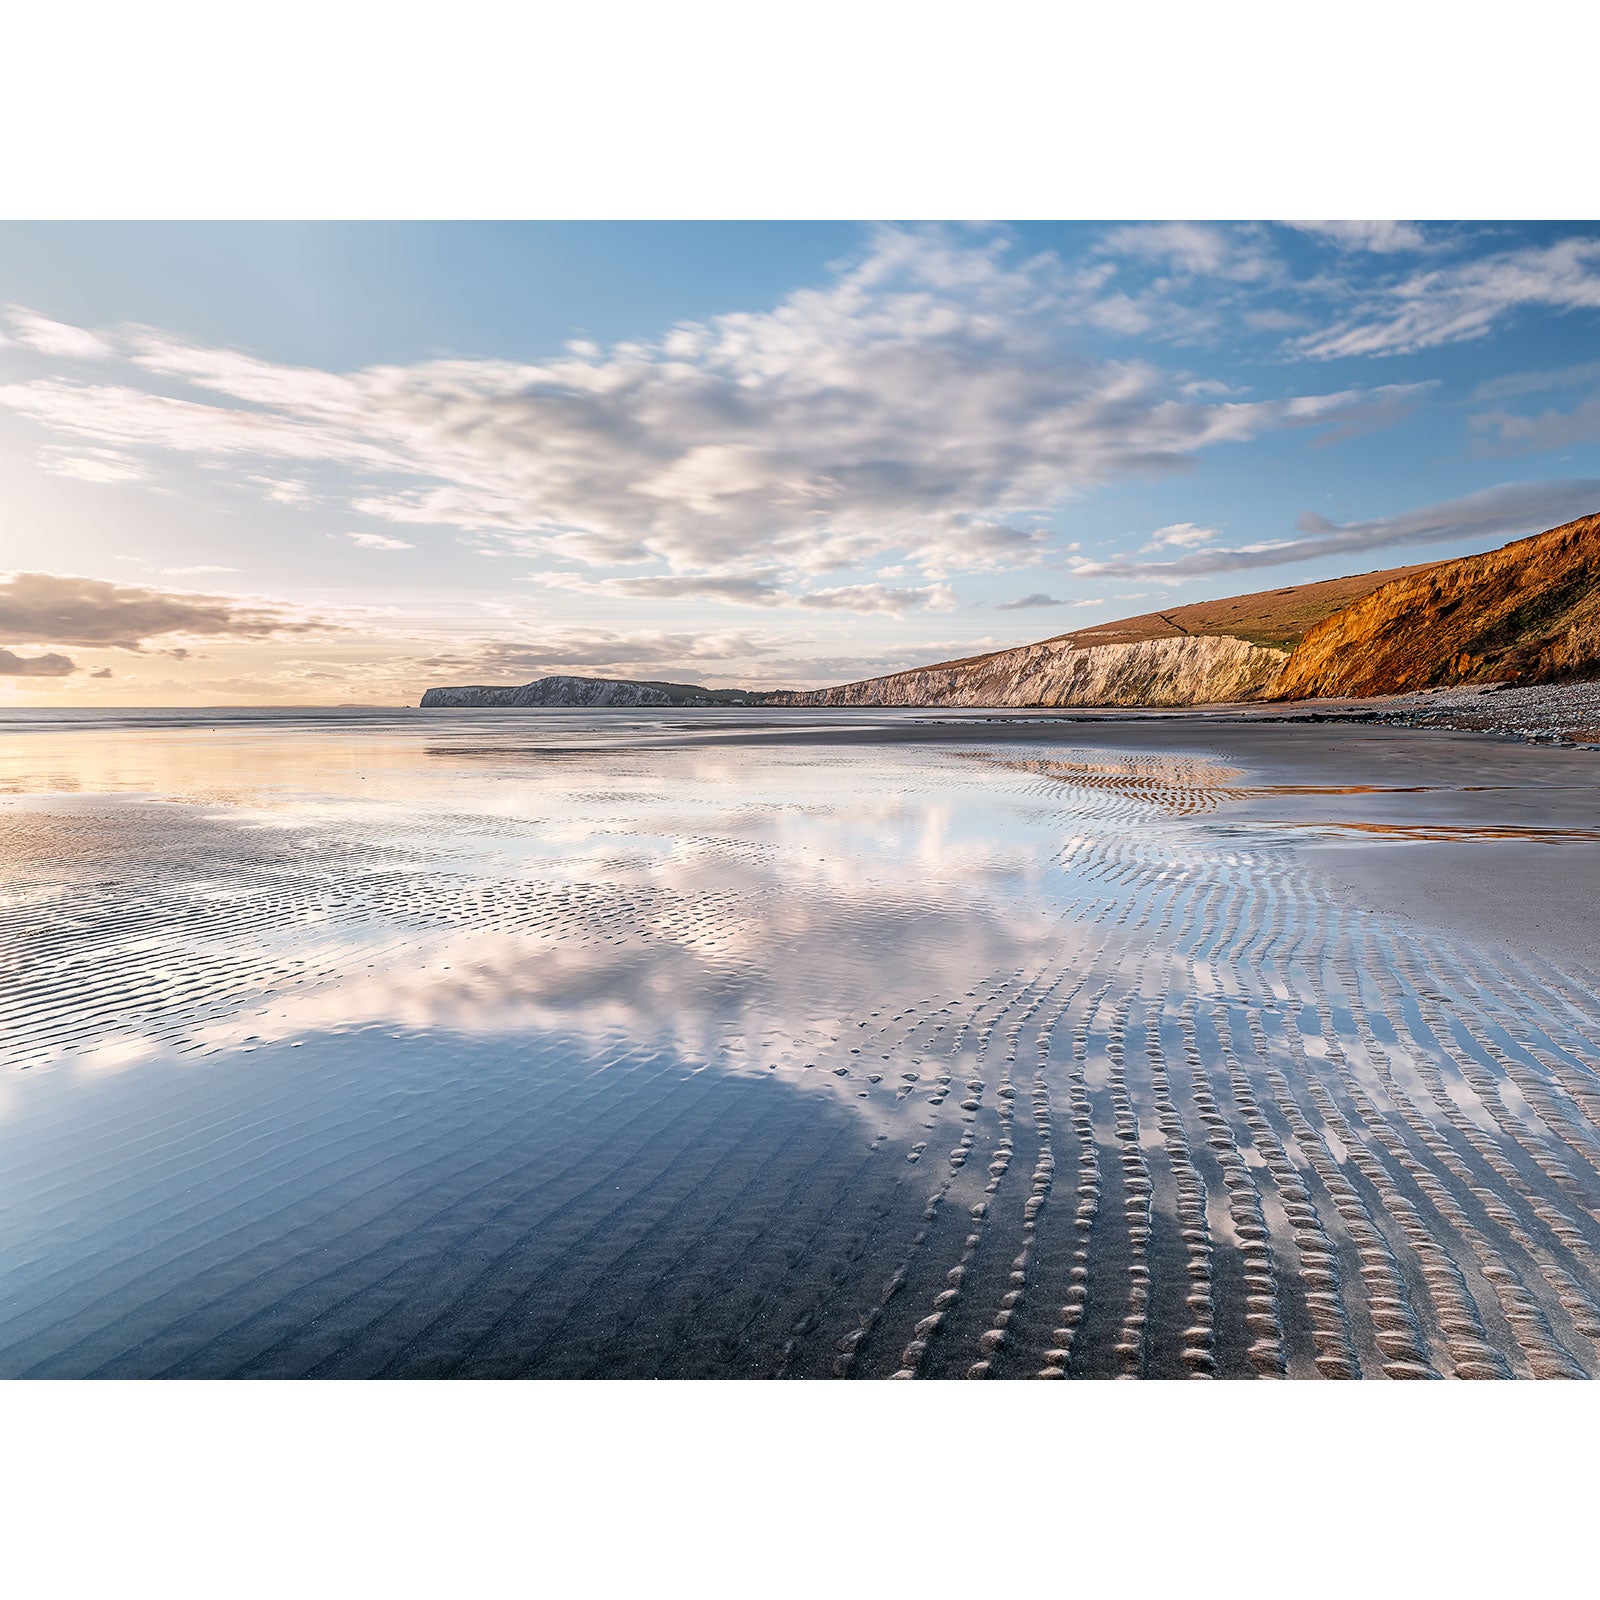 A serene beach at low tide with rippled sand, coastal cliffs in the background, and a calm sunset sky over Compton Bay by Available Light Photography.